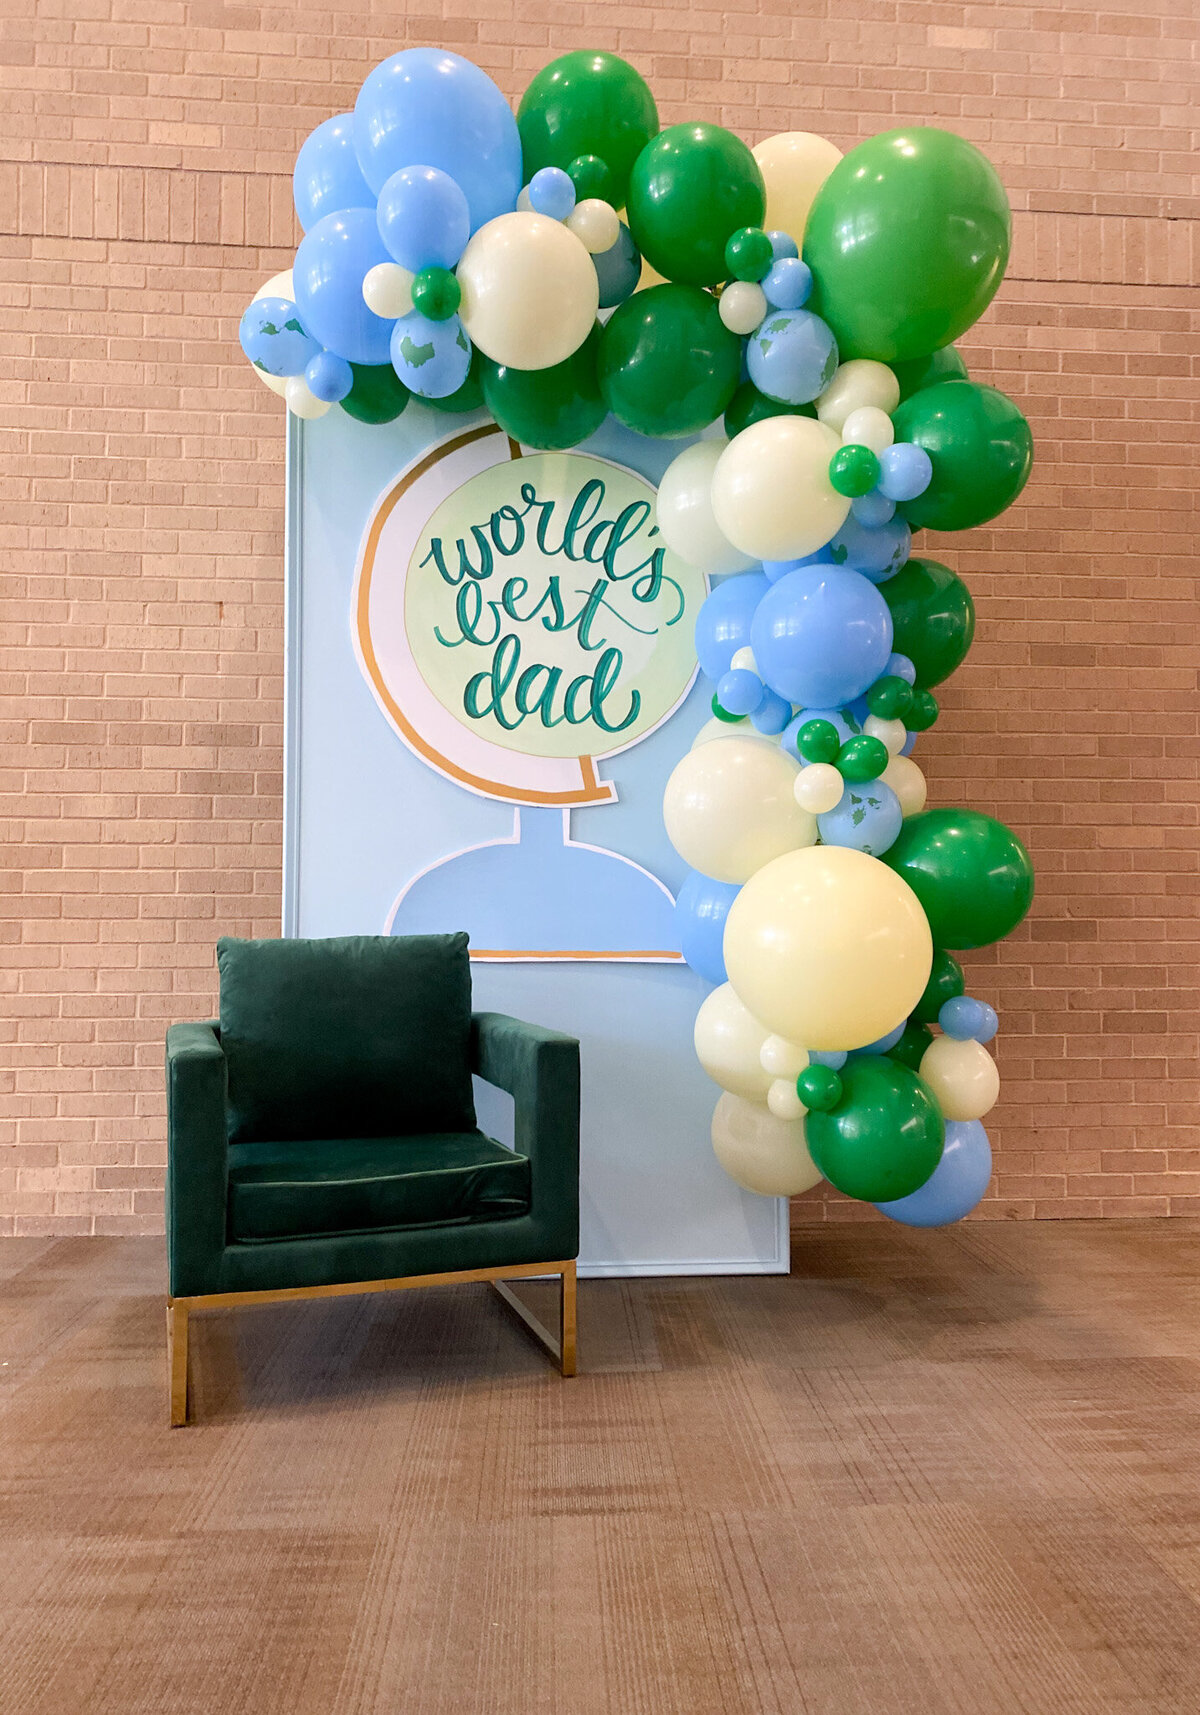 Blue and green World's Best Dad fathers day backdrop with a green chair and balloon arch